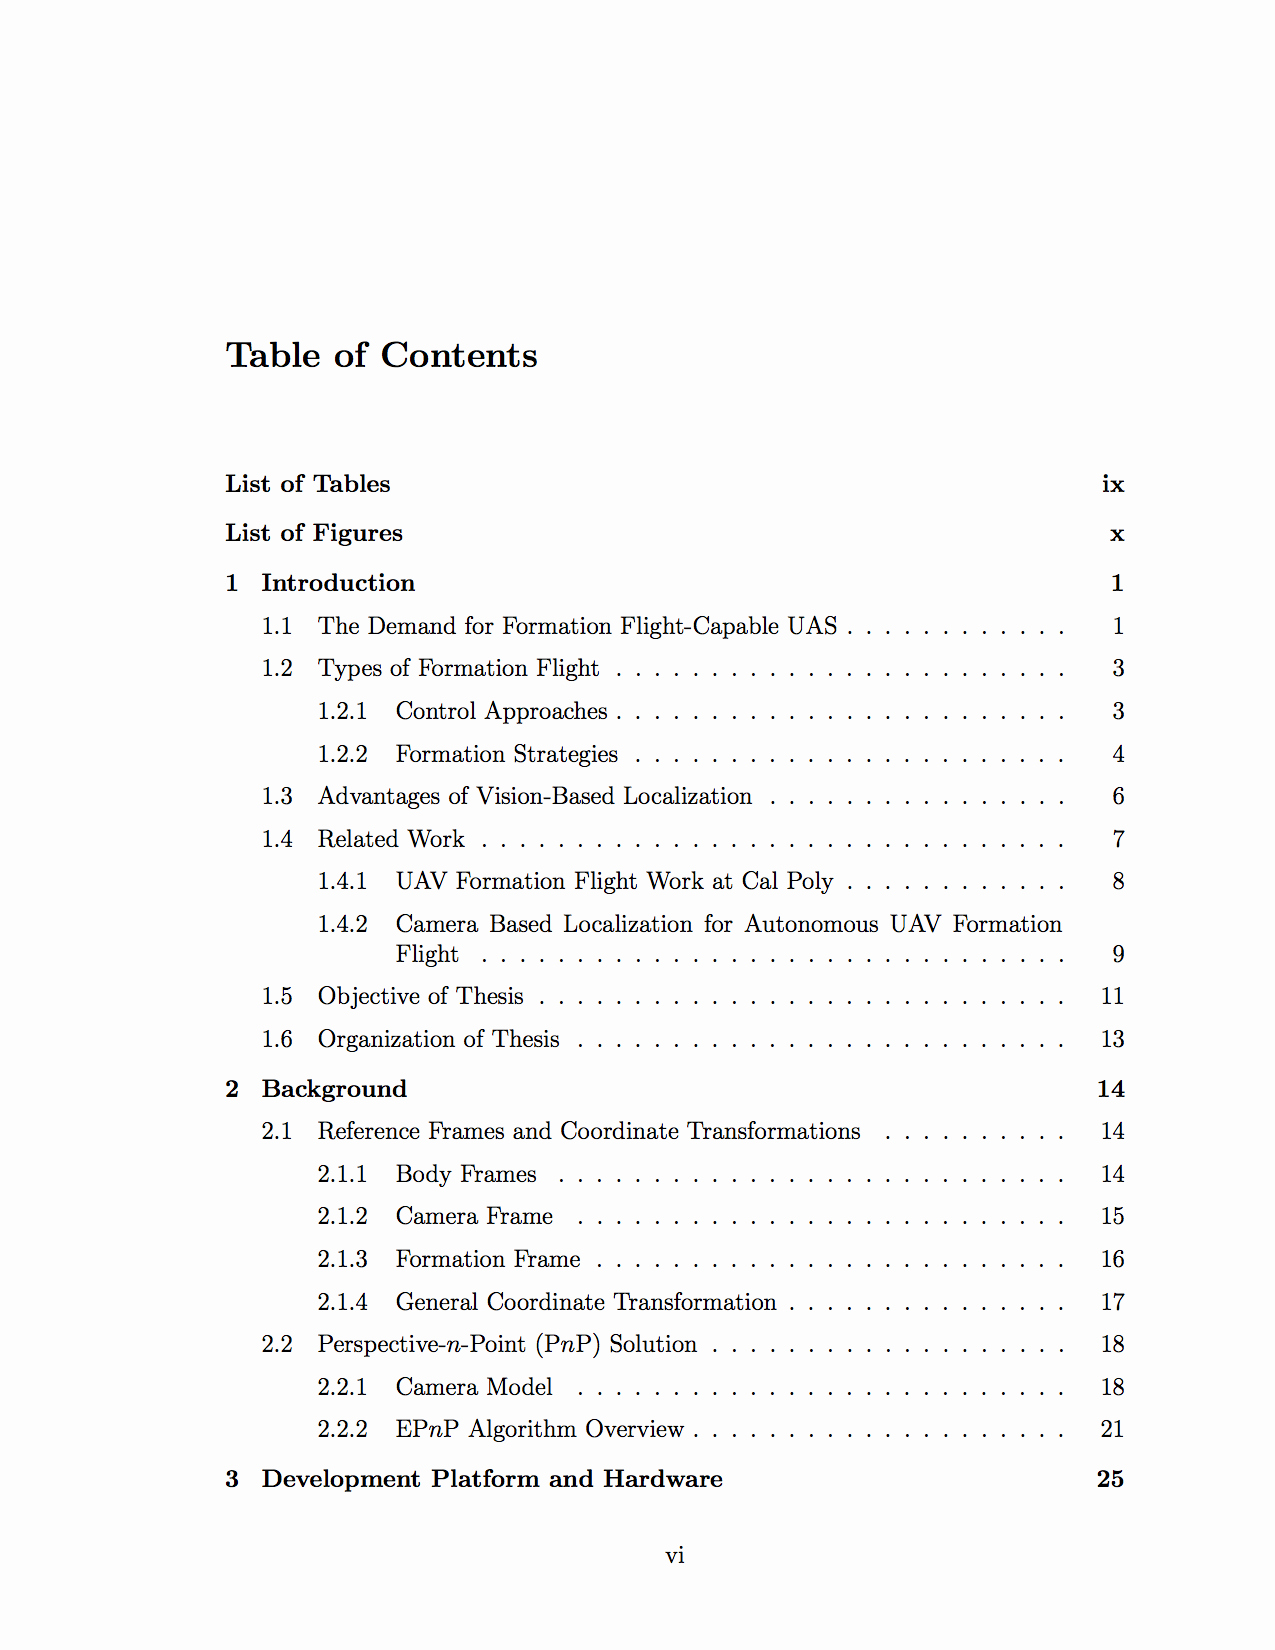 Table Of Contents Template Lovely Chapters Modifying formatting Of Table Of Contents